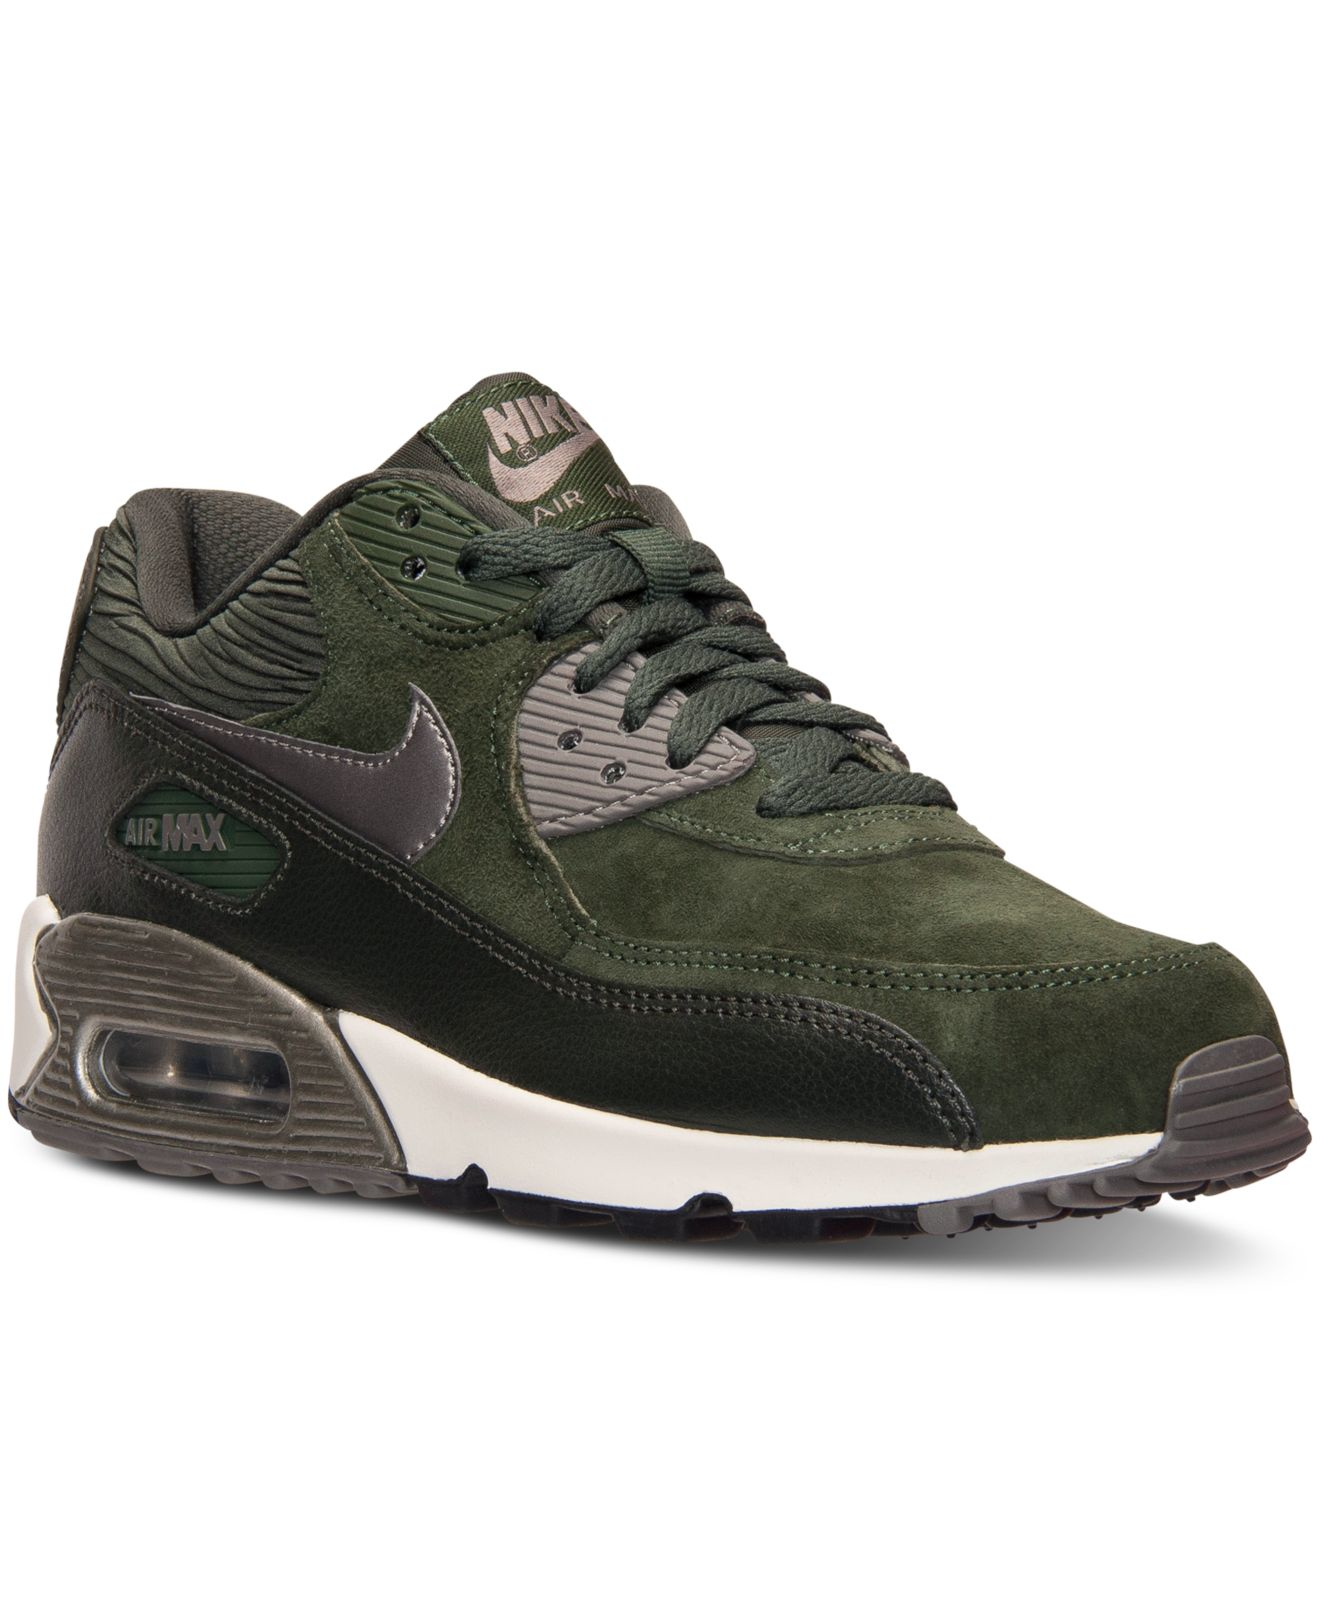 Nike Women's Air Max 90 Leather Running Sneakers From Finish Line in ...